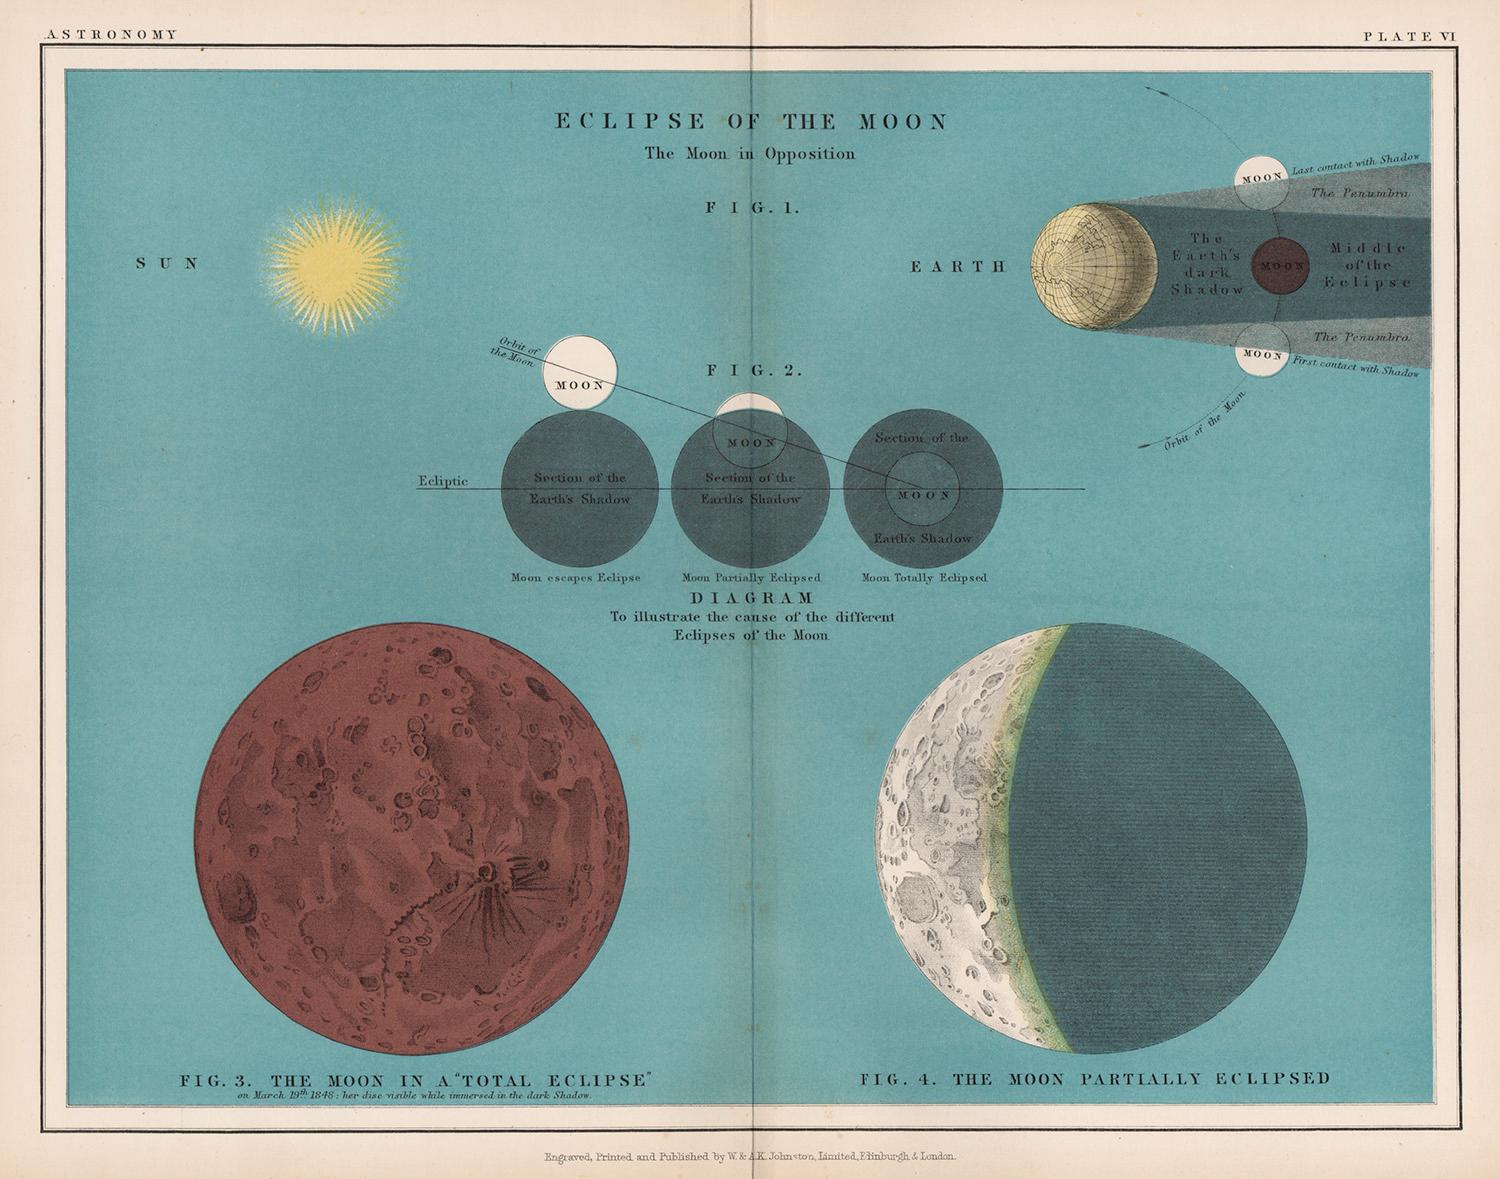 Alexander Keith Johnston Abstract Print - Eclipse of the Moon, antique astronomy lunar diagram print